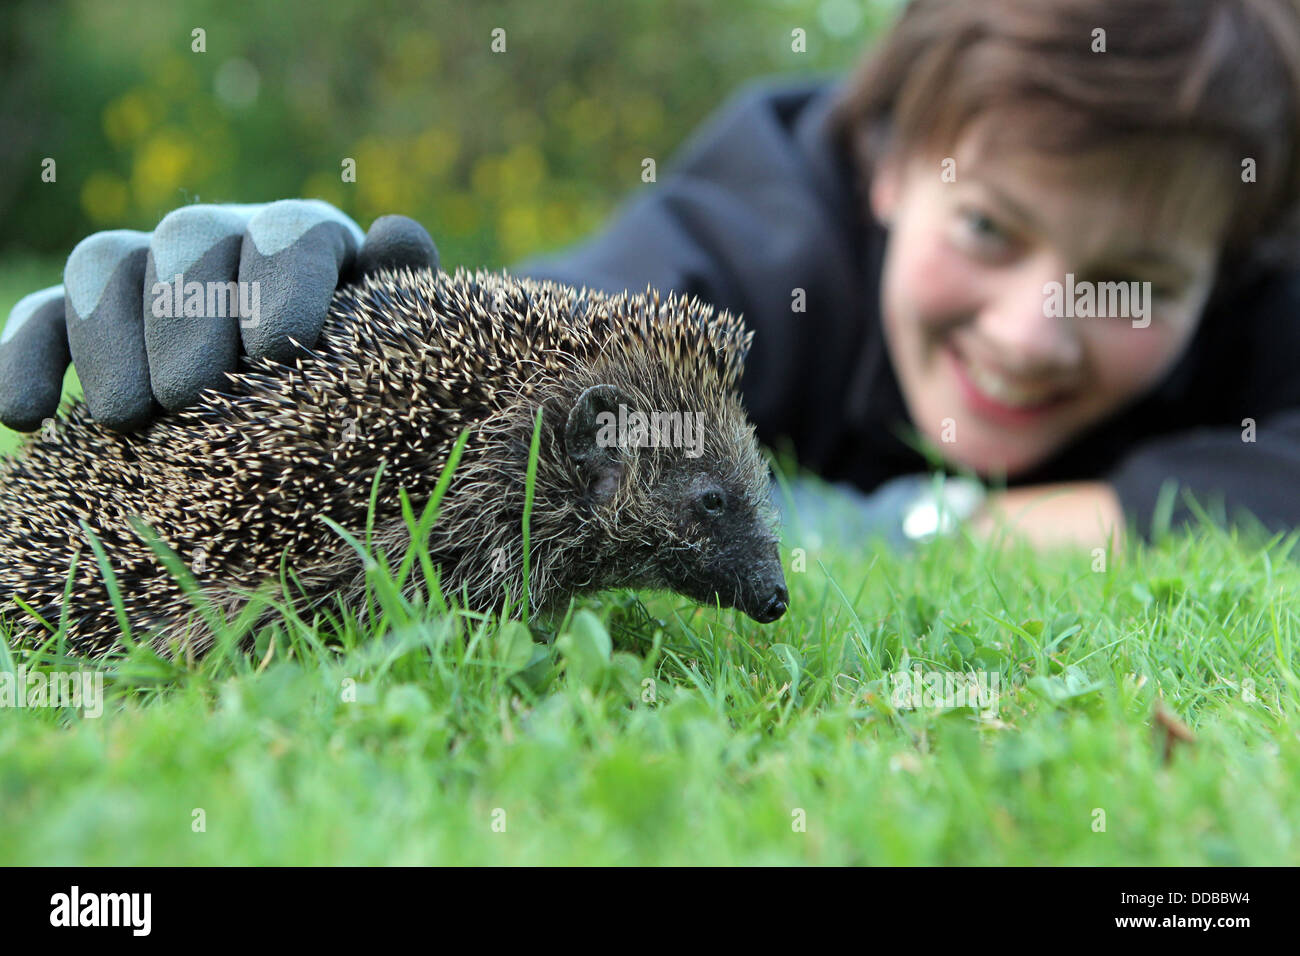 Wees. Germany, woman caresses a hedgehog with glove Stock Photo